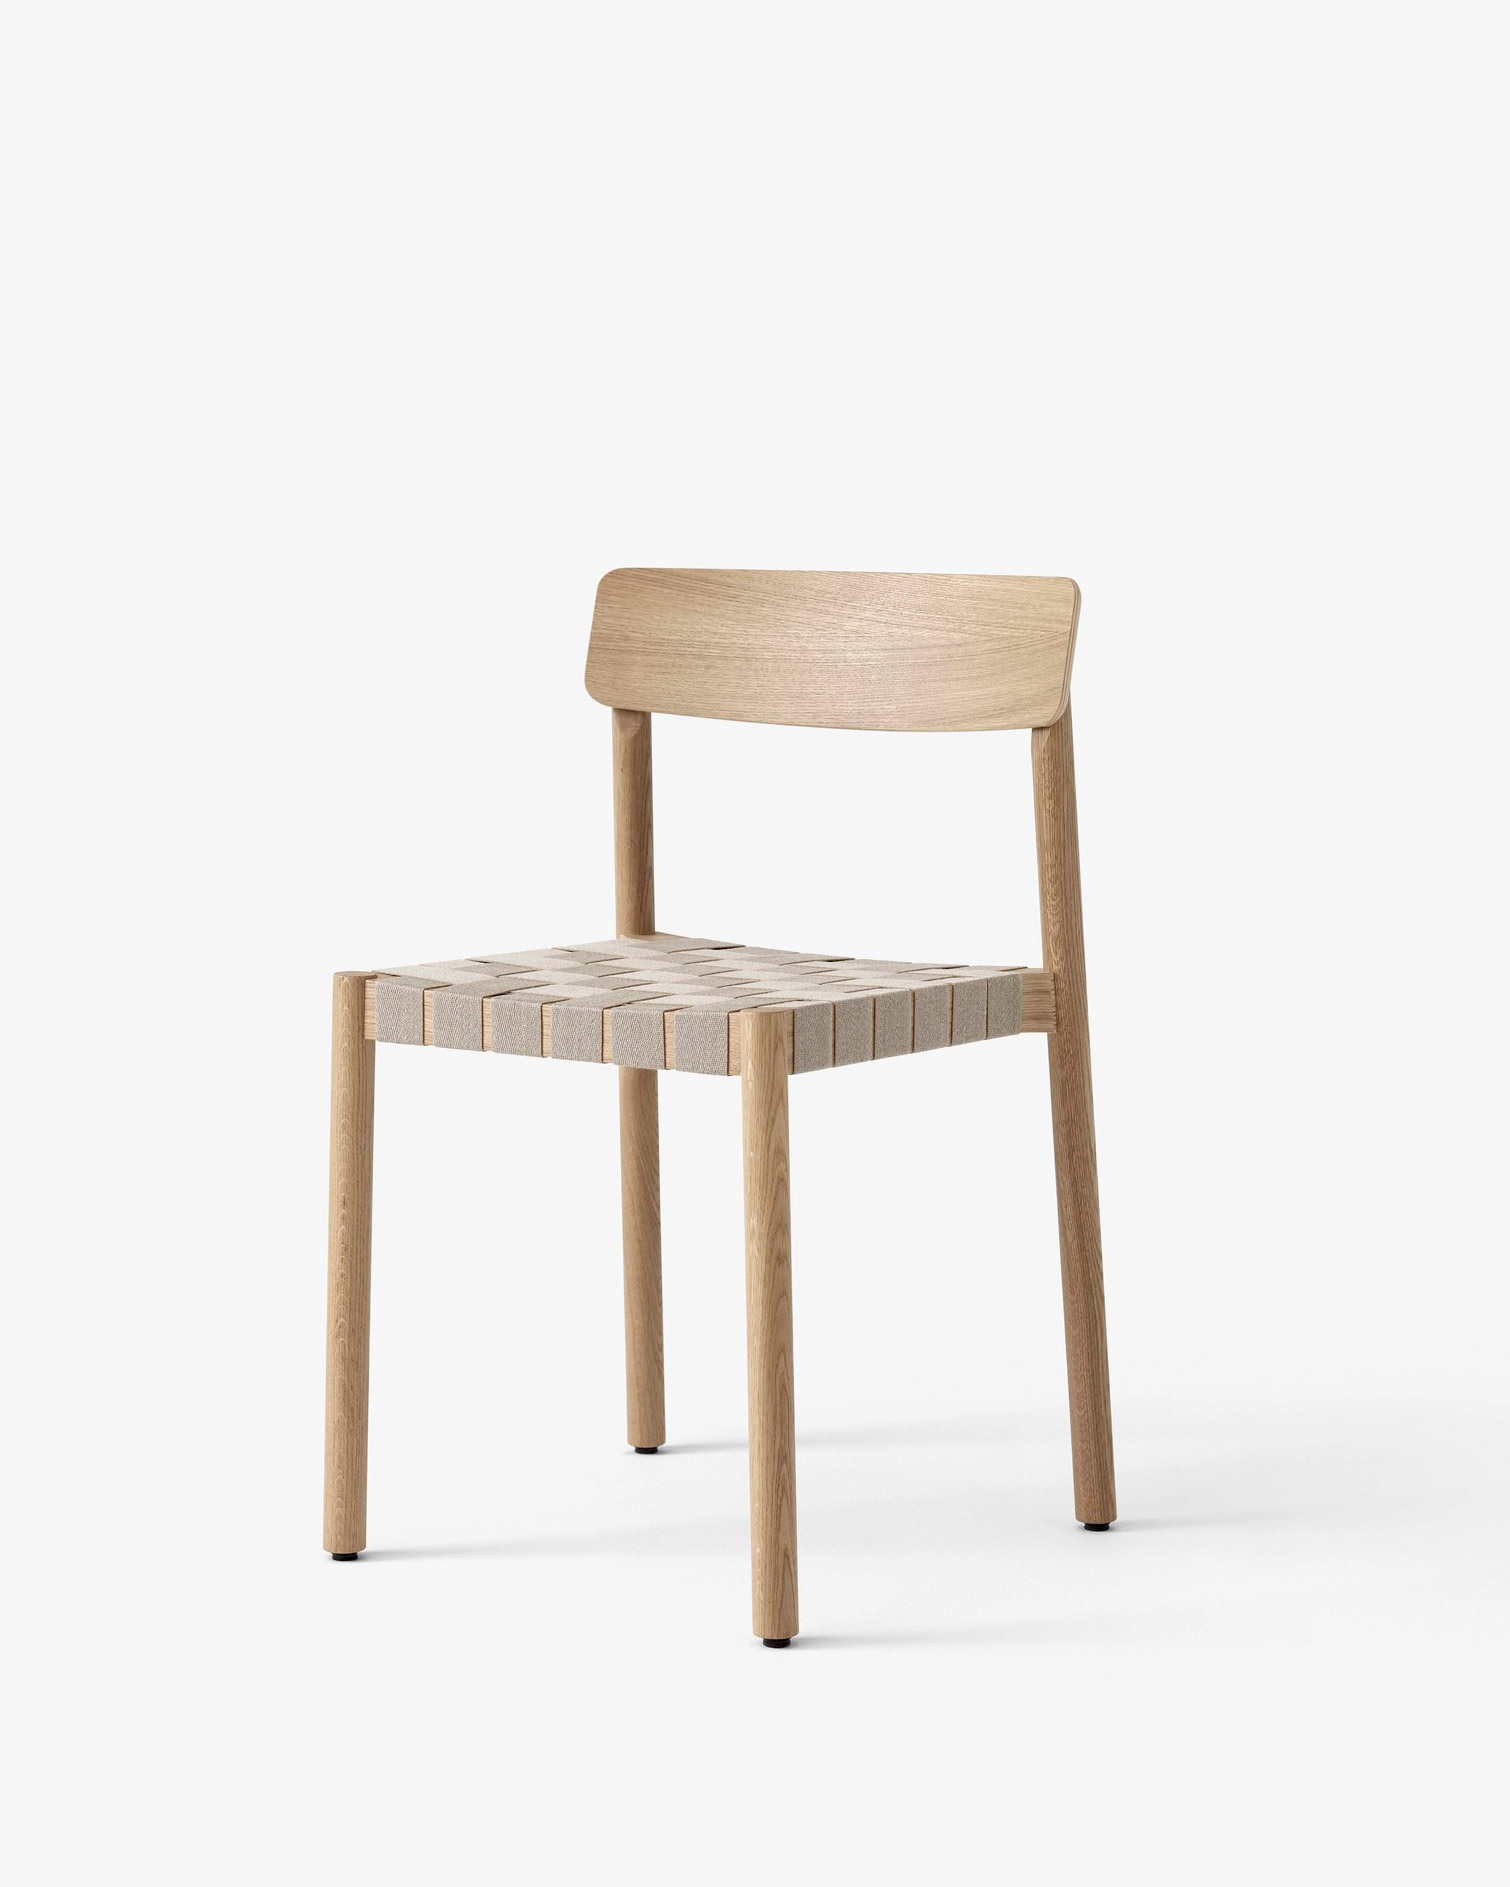 Oak Betty Chair by Thau & Kallio with a seat made of exposed webbing | Aesence